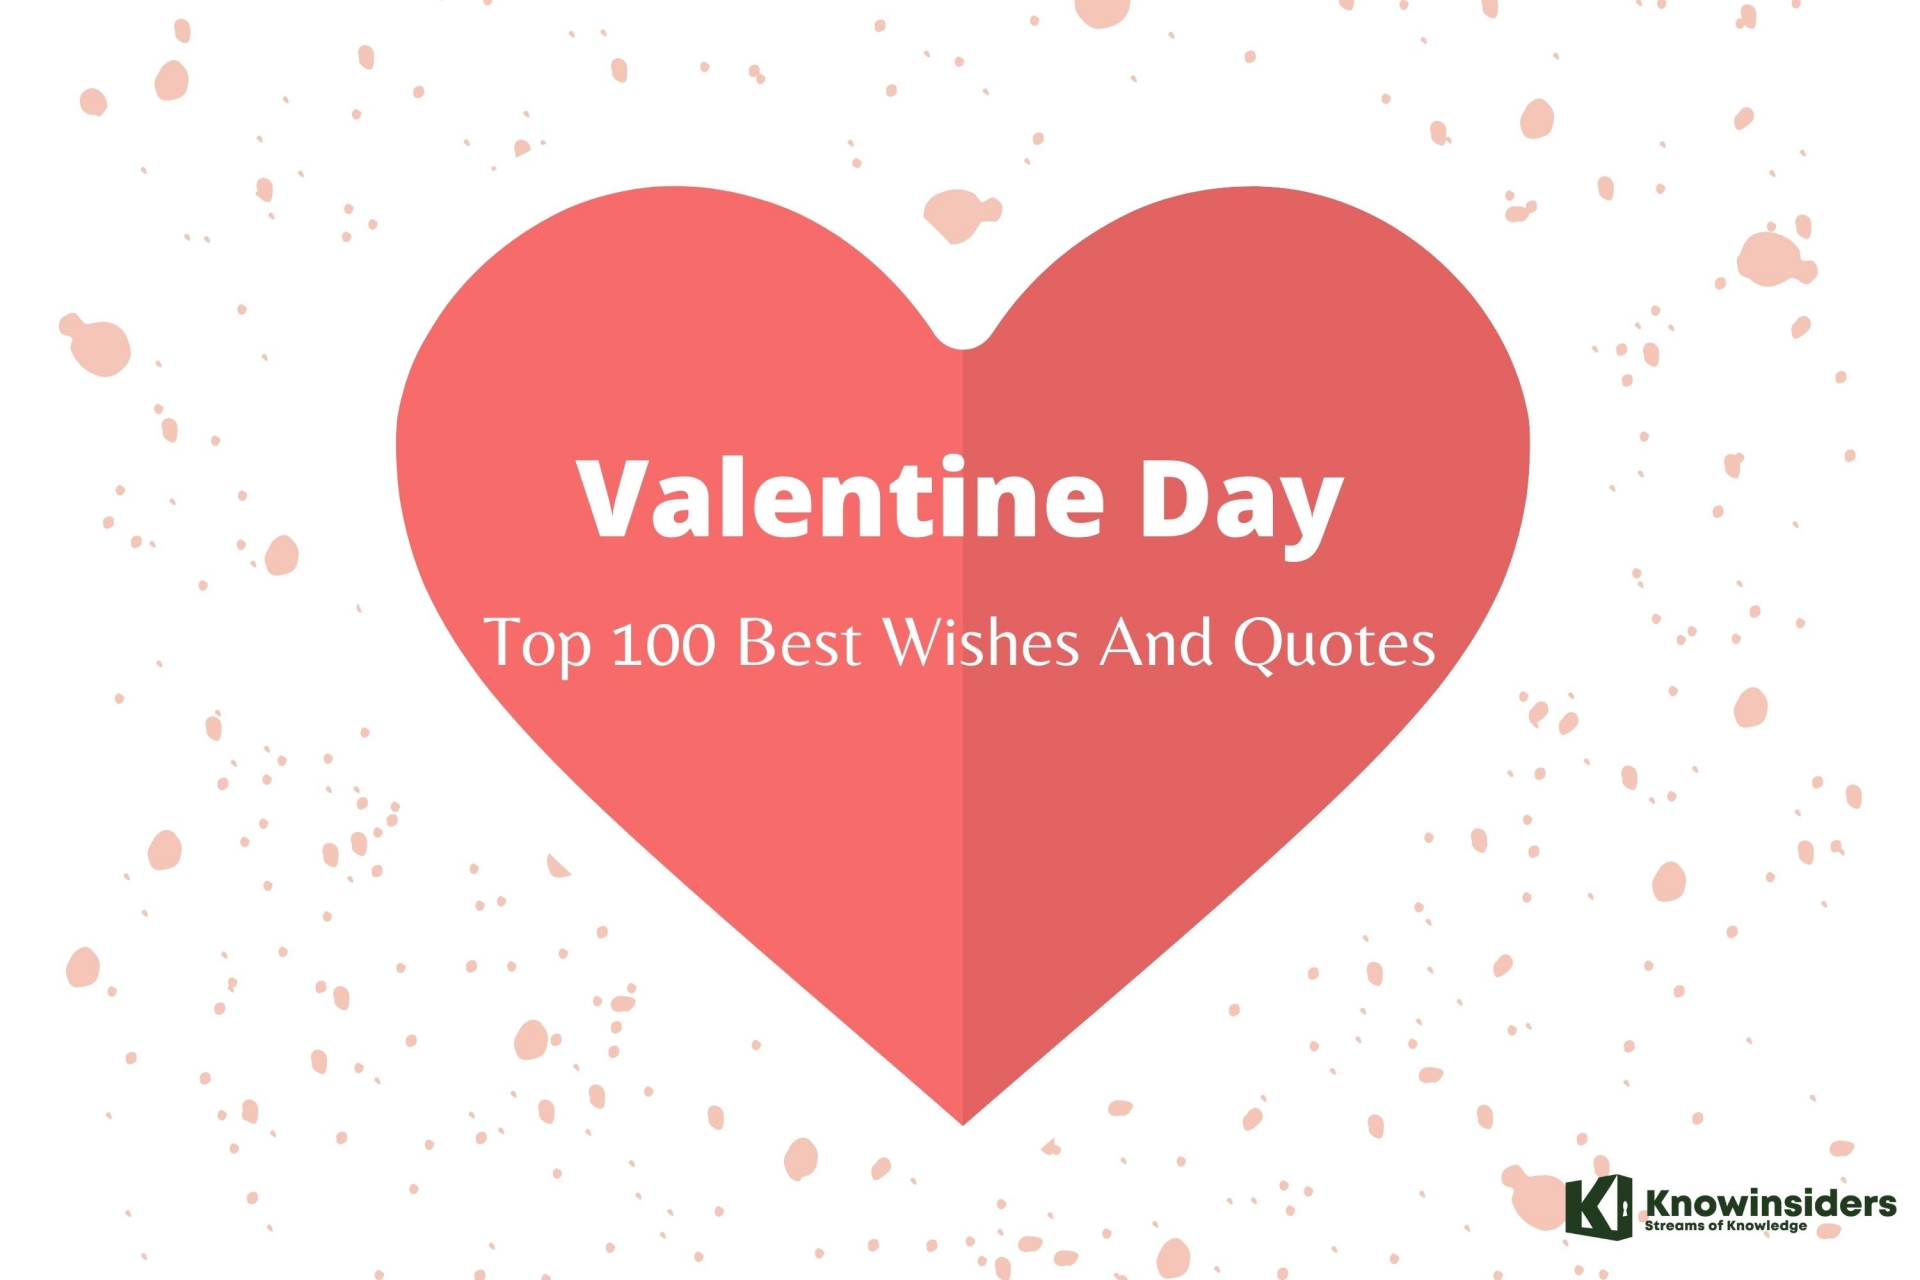 Valentine’s Day: Top 100 Best Wishes And Messages